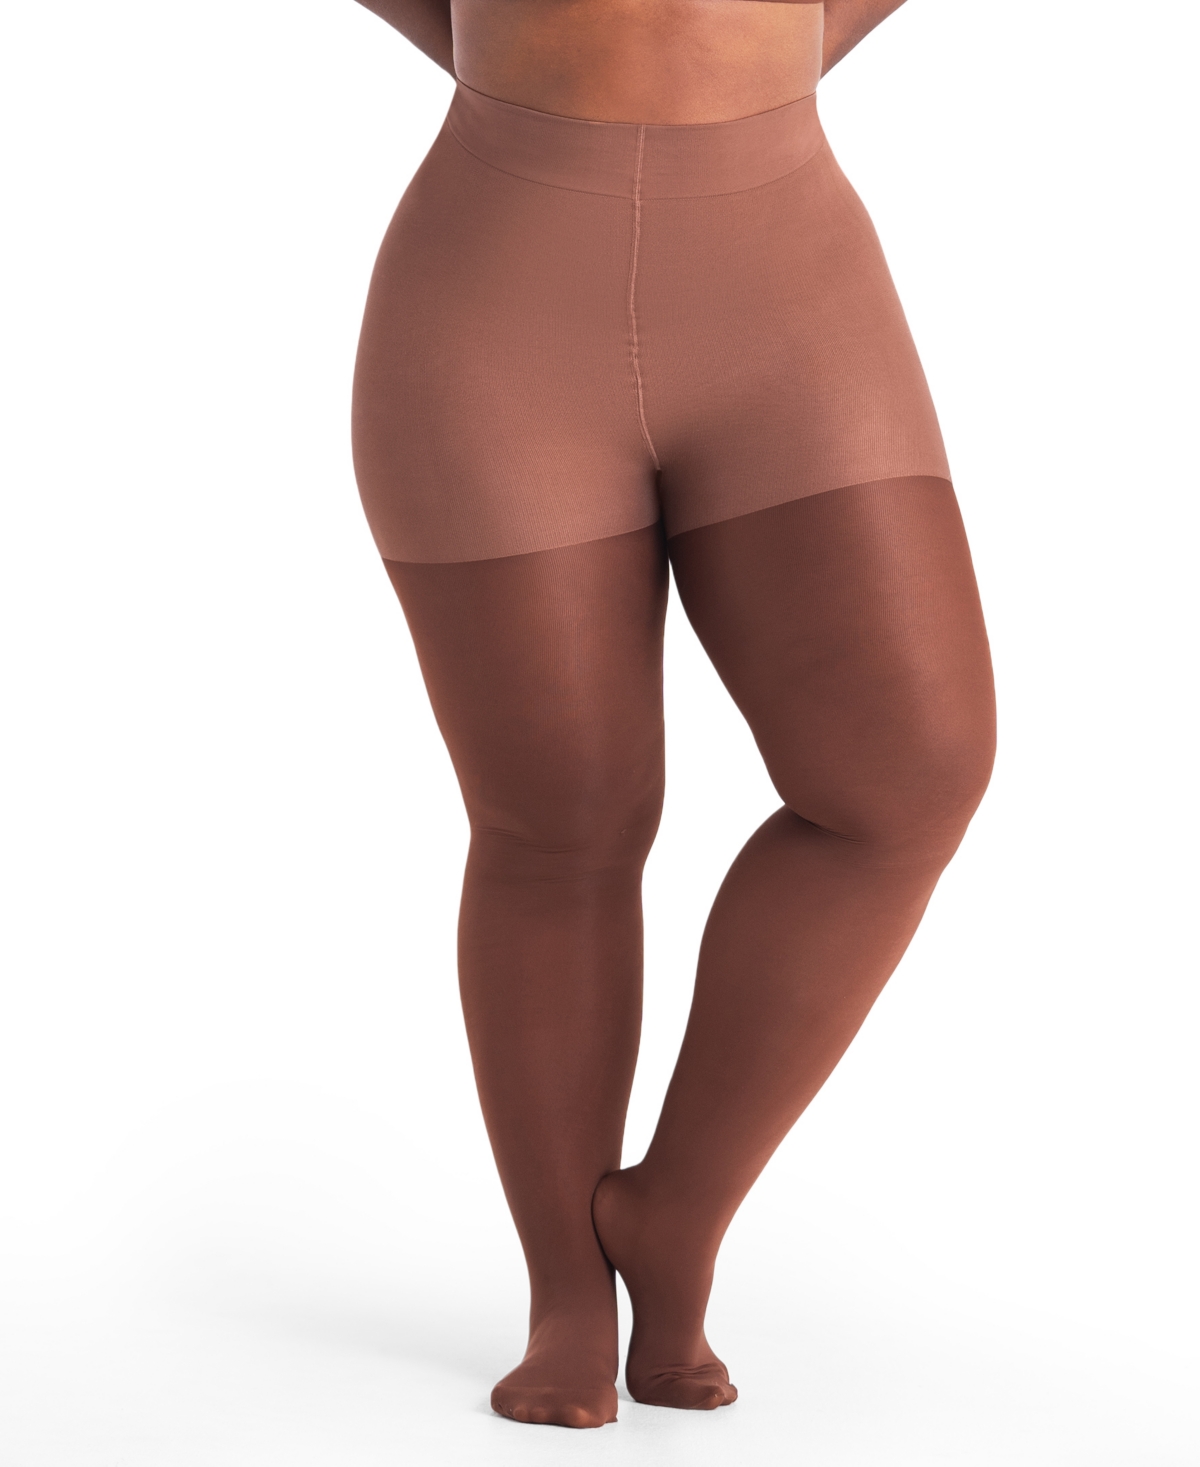 Women's Ultra-Resistant Shaping Tights 31048 - Chocolate